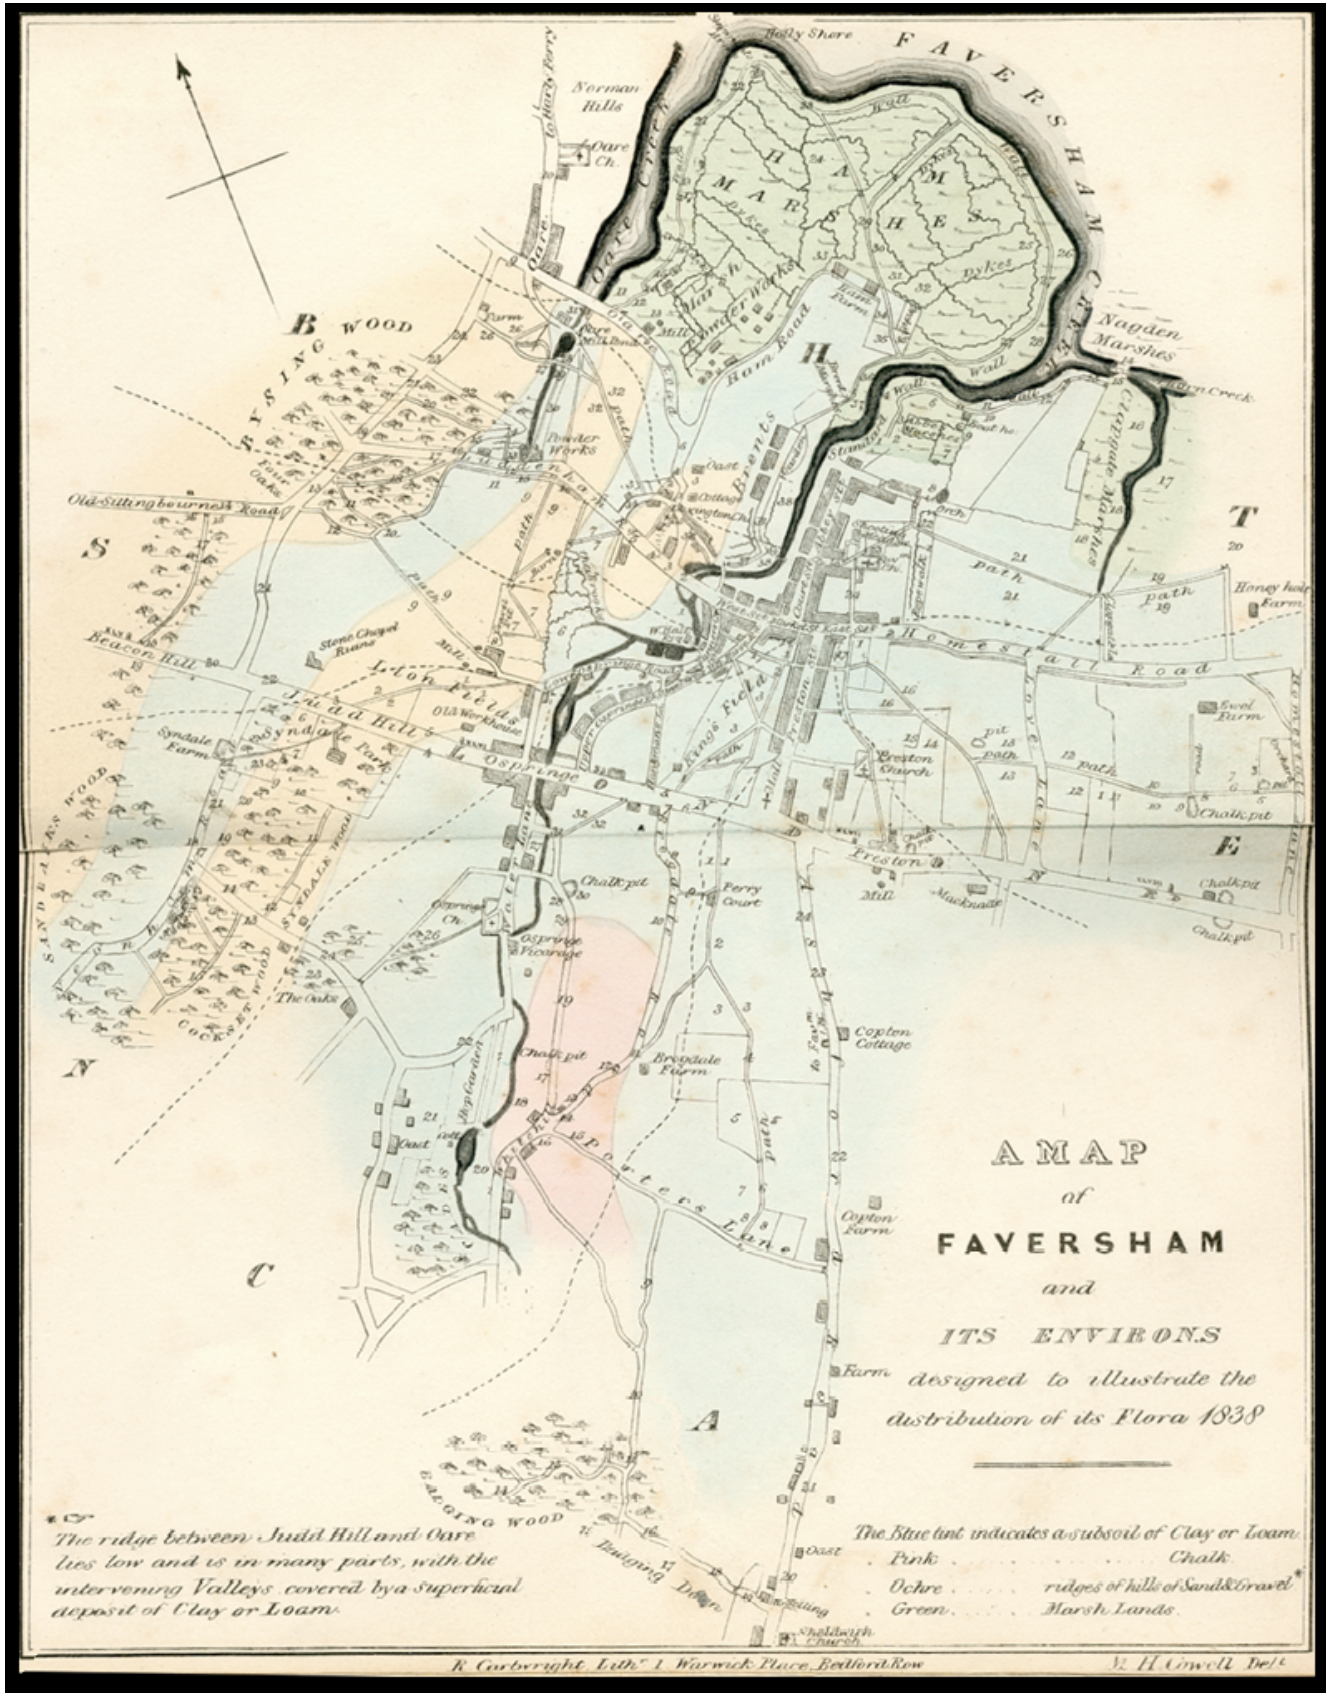 A Map of Favesham and its environs designed to illustrate the distributioin of its Flora 1838